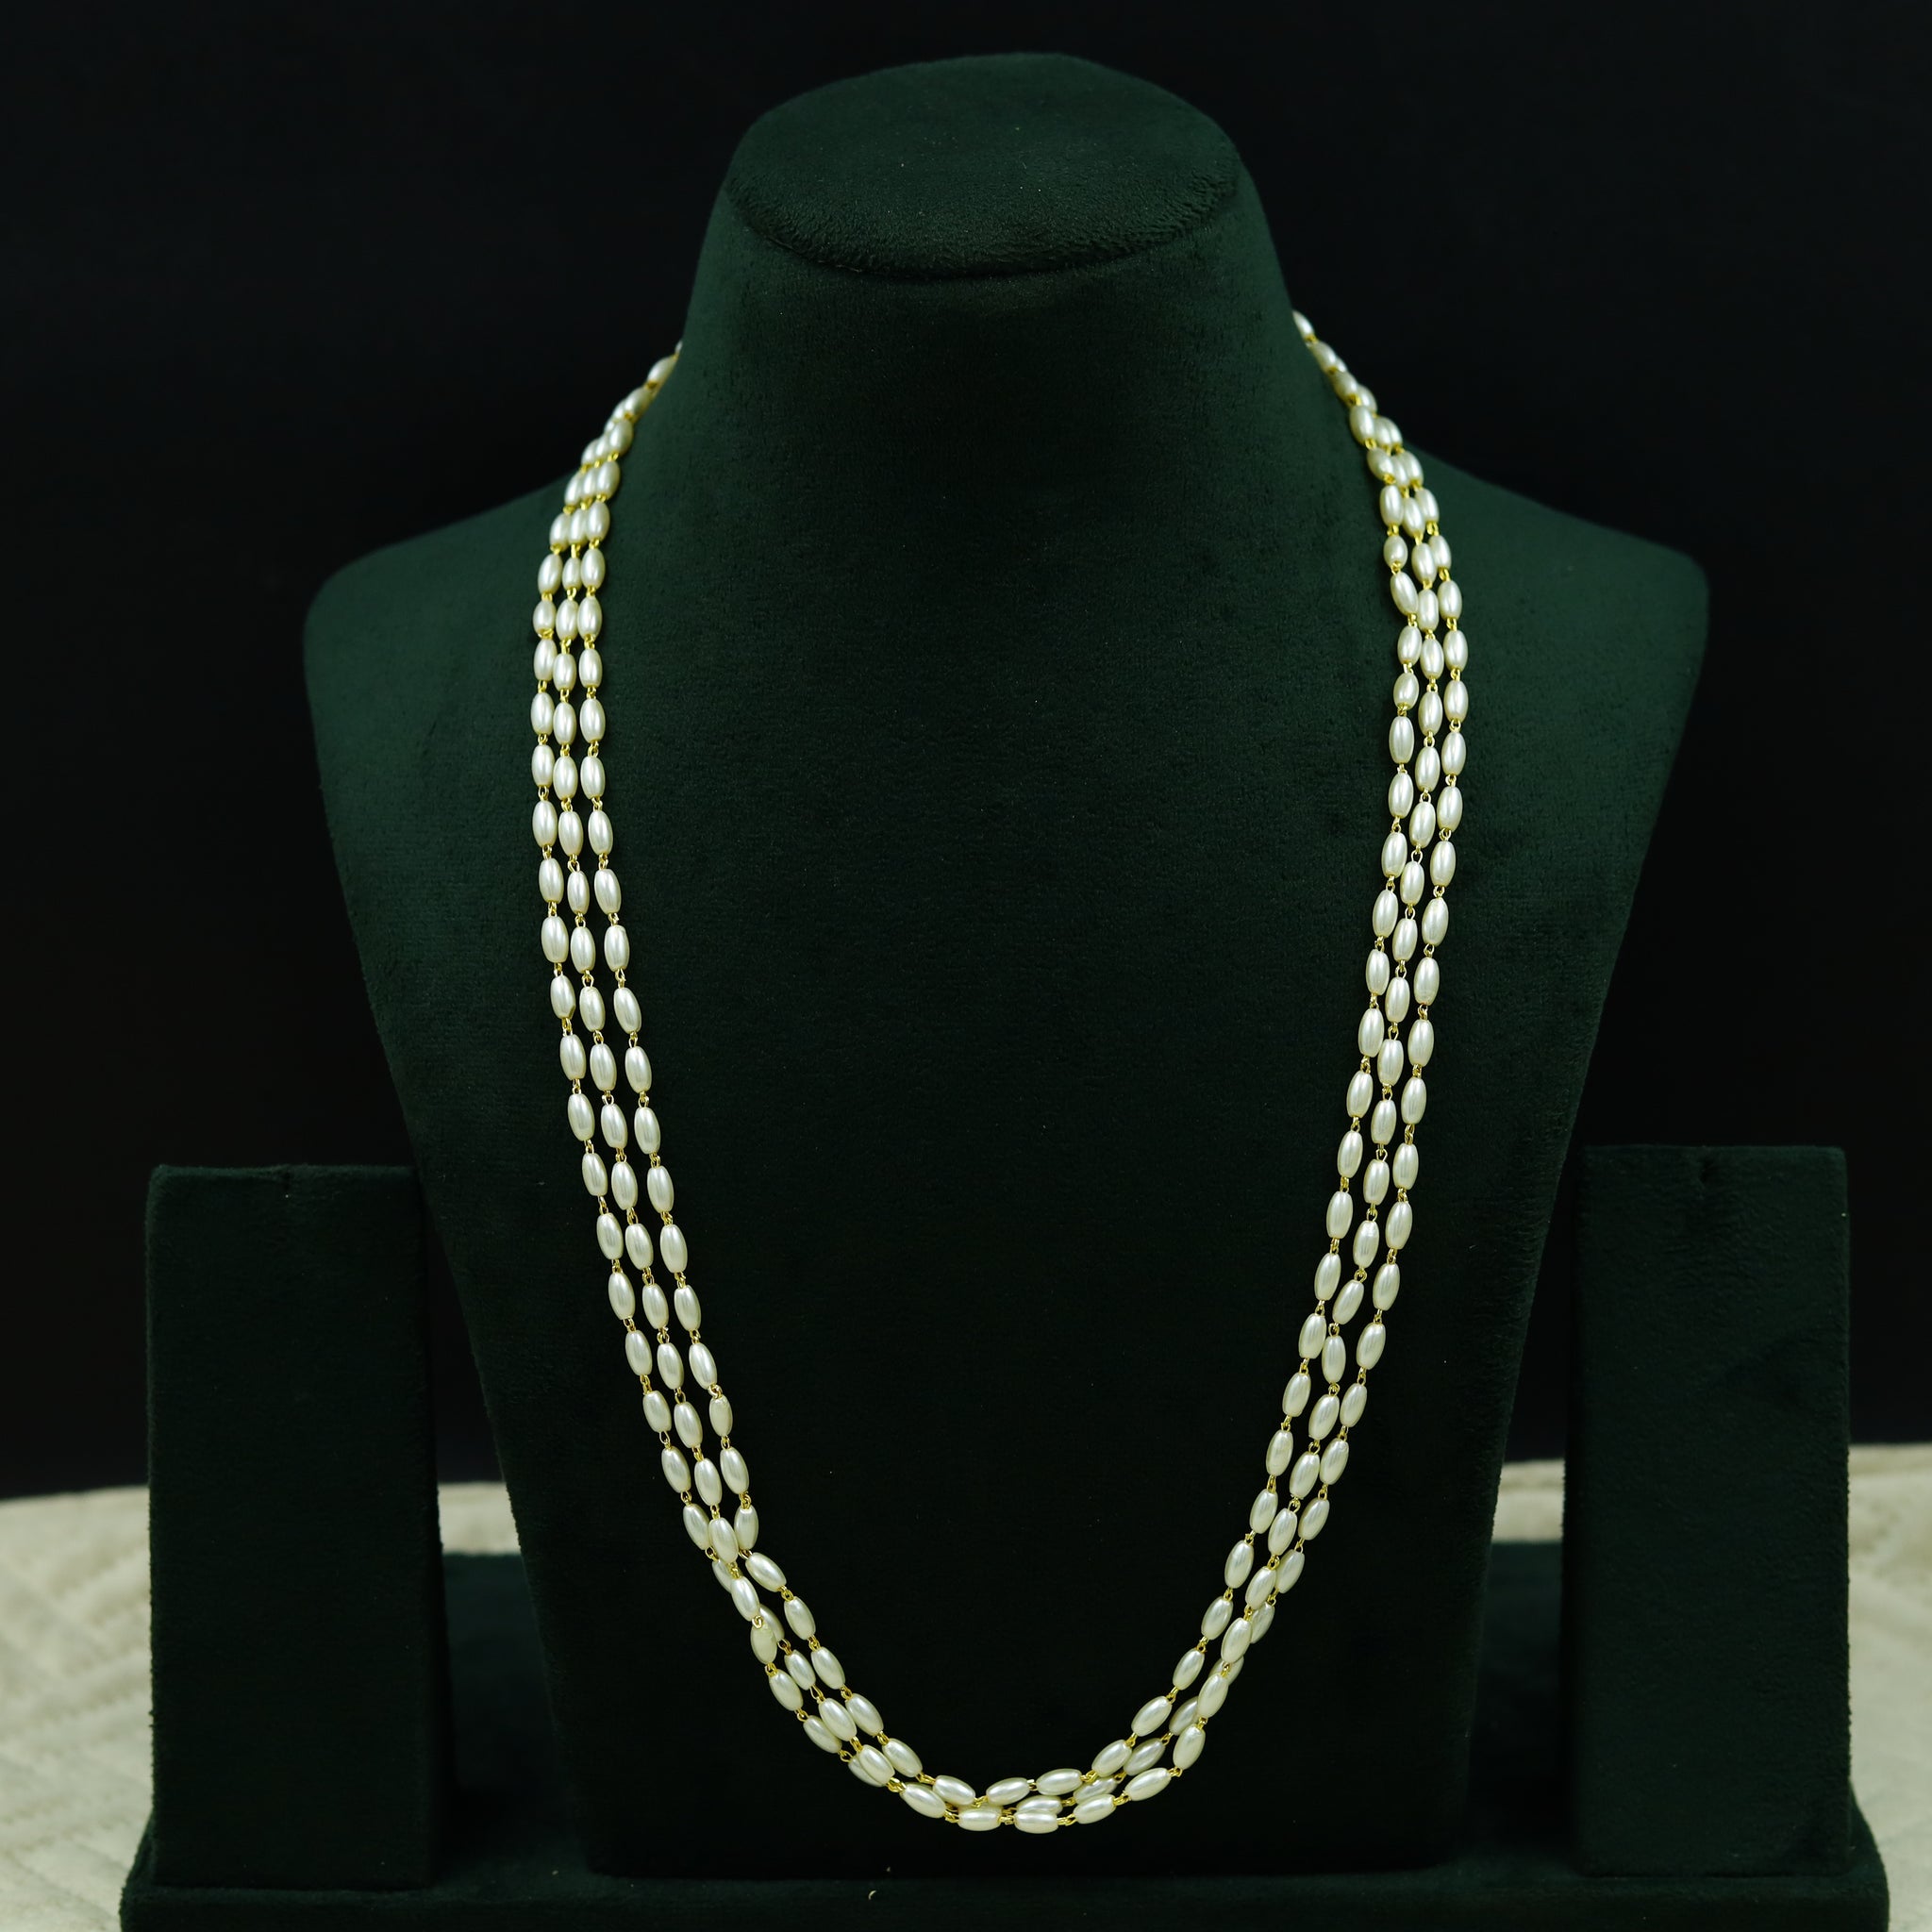 Round Neck Pearl Necklace Set 12870-31